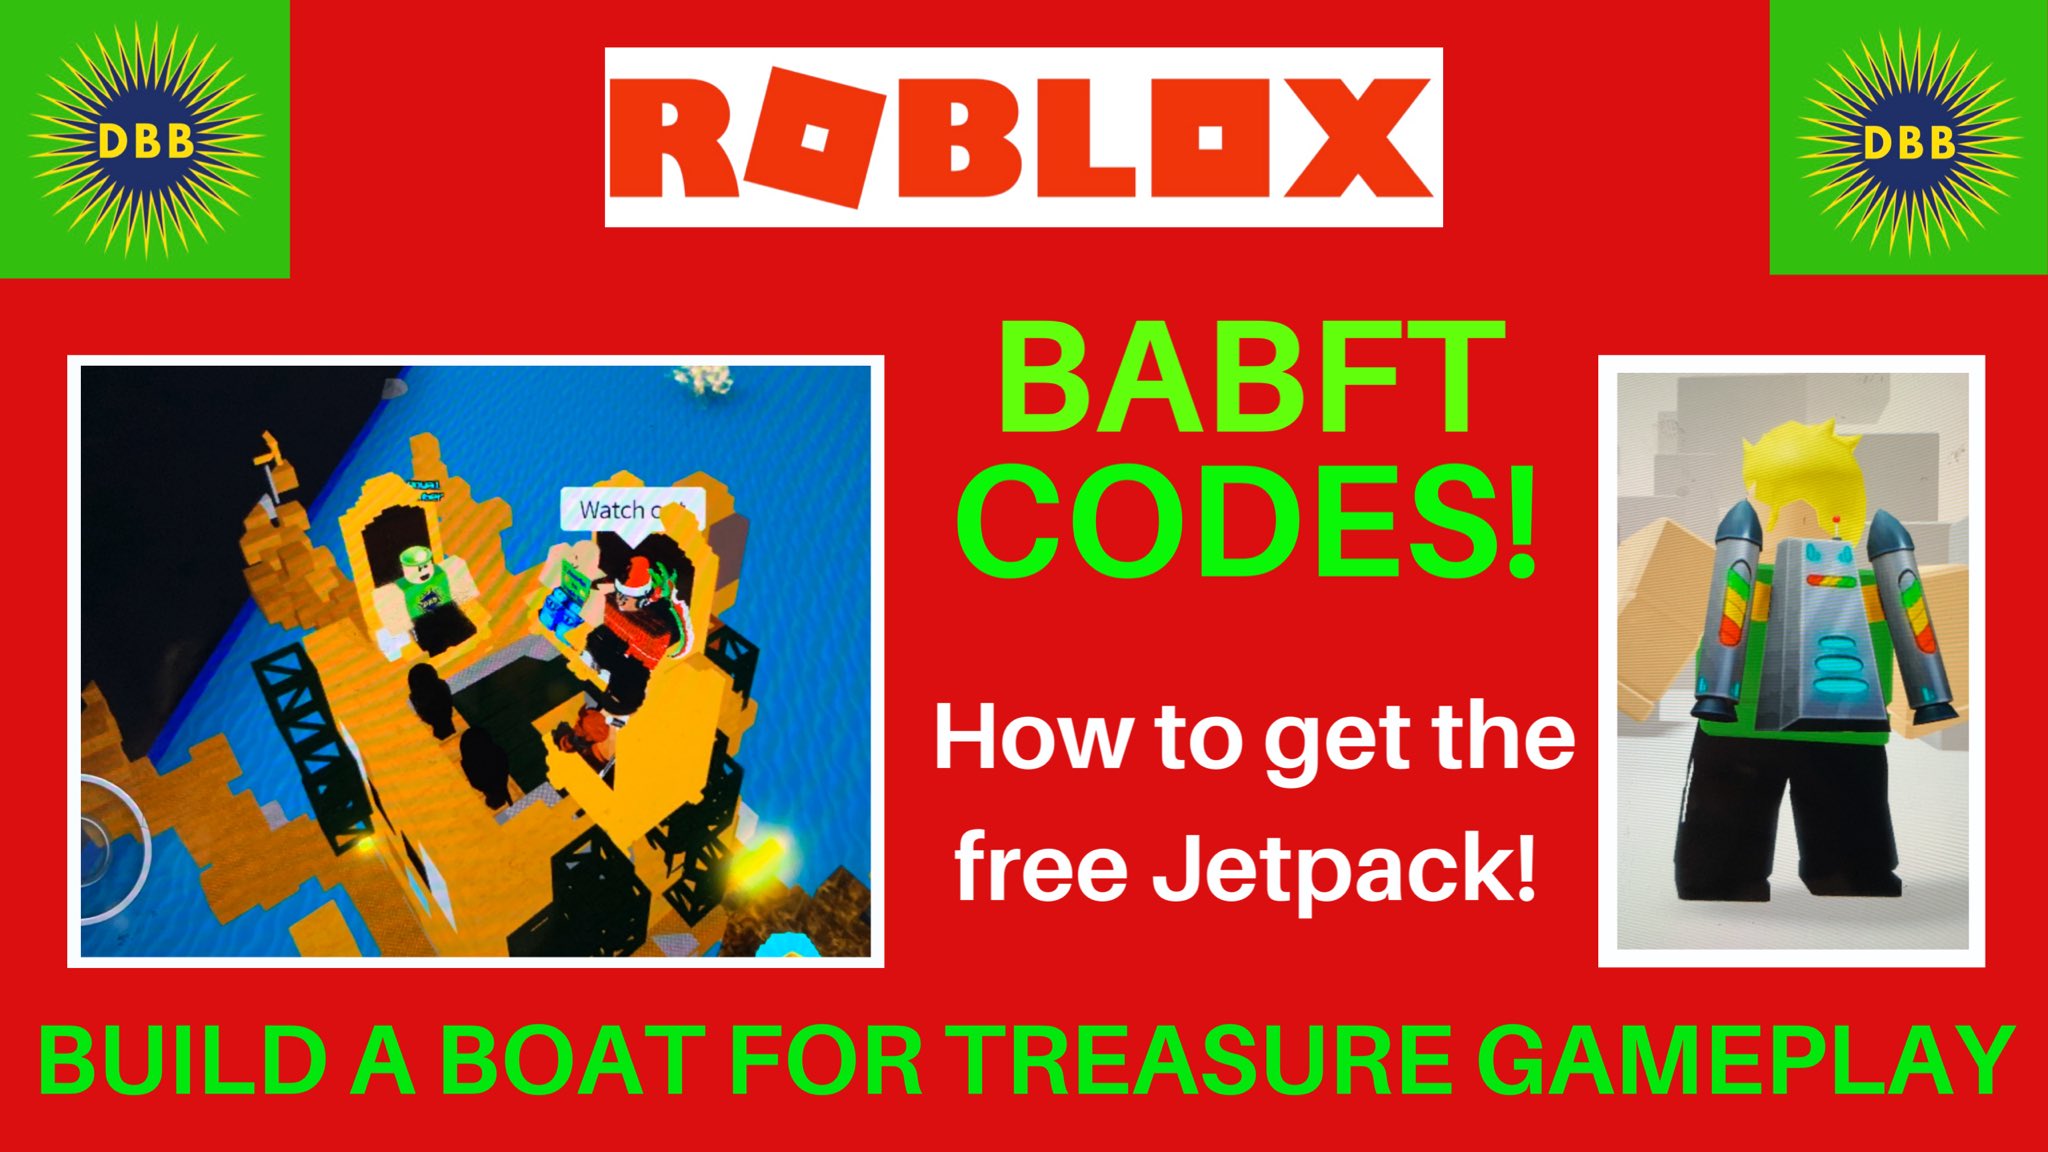 Deathbotbrothers On Twitter Roblox Codes Build A Boat For Treasure Babft Codes And Gameplay Plus How Https T Co Zckwa2iipk Via Youtube Roblox Robloxcodes Robloxgameplay Robloxbabft Babftcodes Buildaboatcodes Buildaboatfortreasure - codes in build a boat for treasure roblox yt